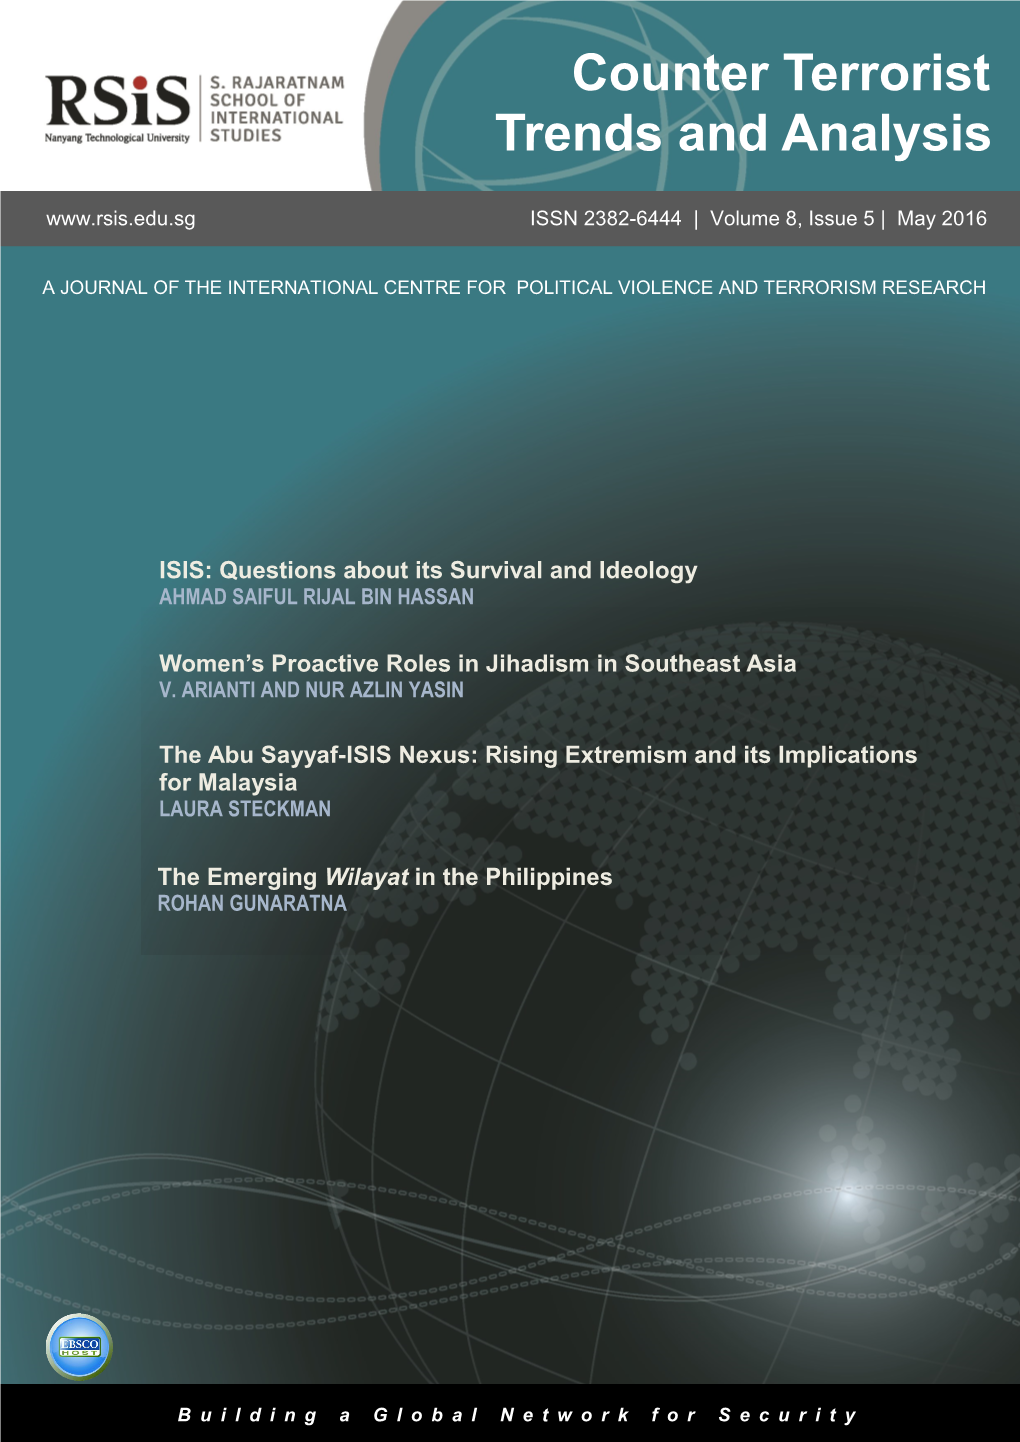 Counter Terrorist Trends and Analysis ISSN 2382-6444 | Volume 8, Issue 5 | May 2016